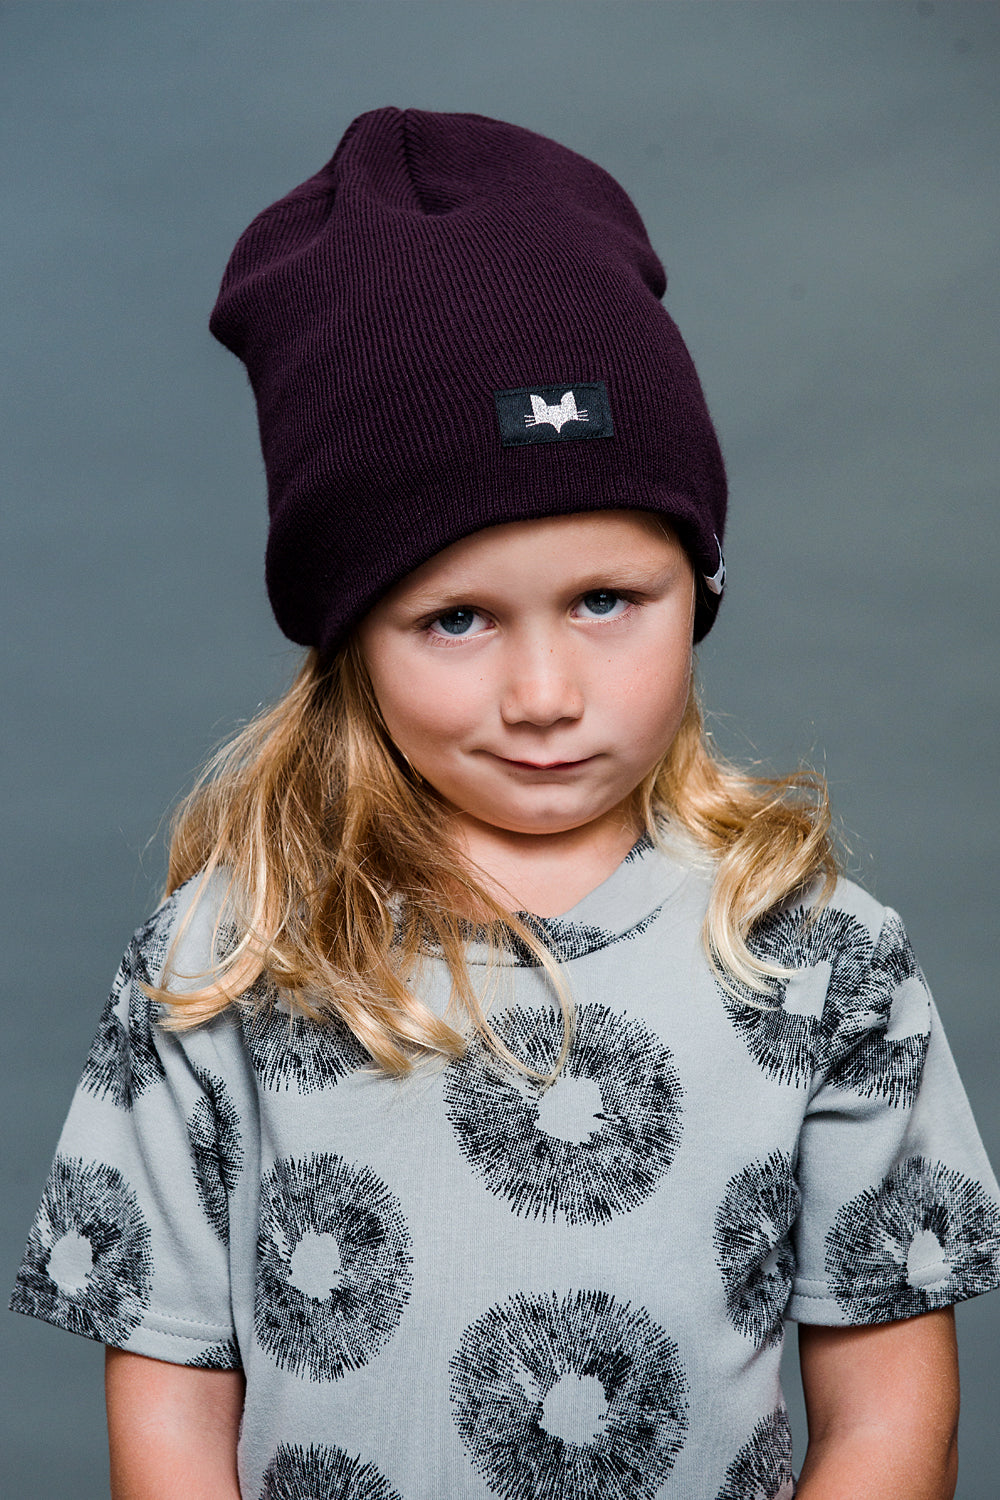 Unisex super soft beanie. Available in black and punchy plum.